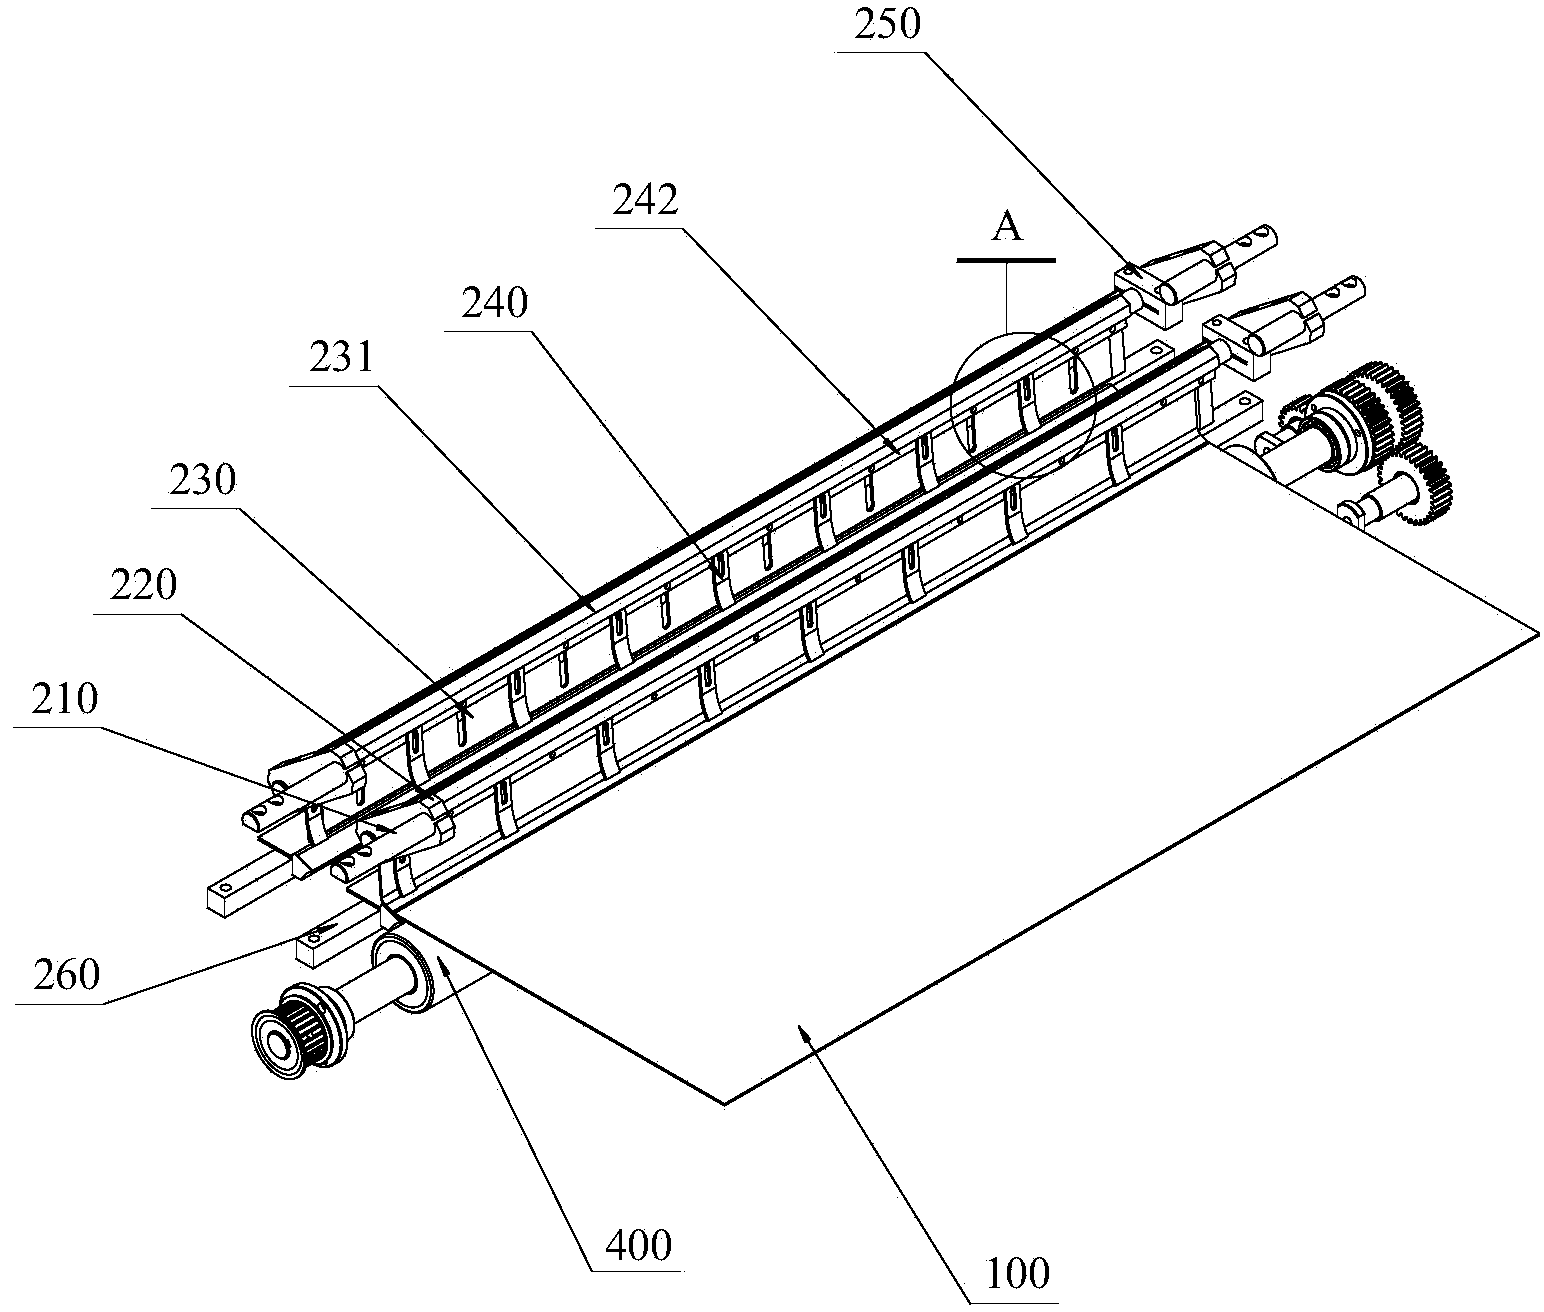 Paper bag machine and paper upper-opening folding device